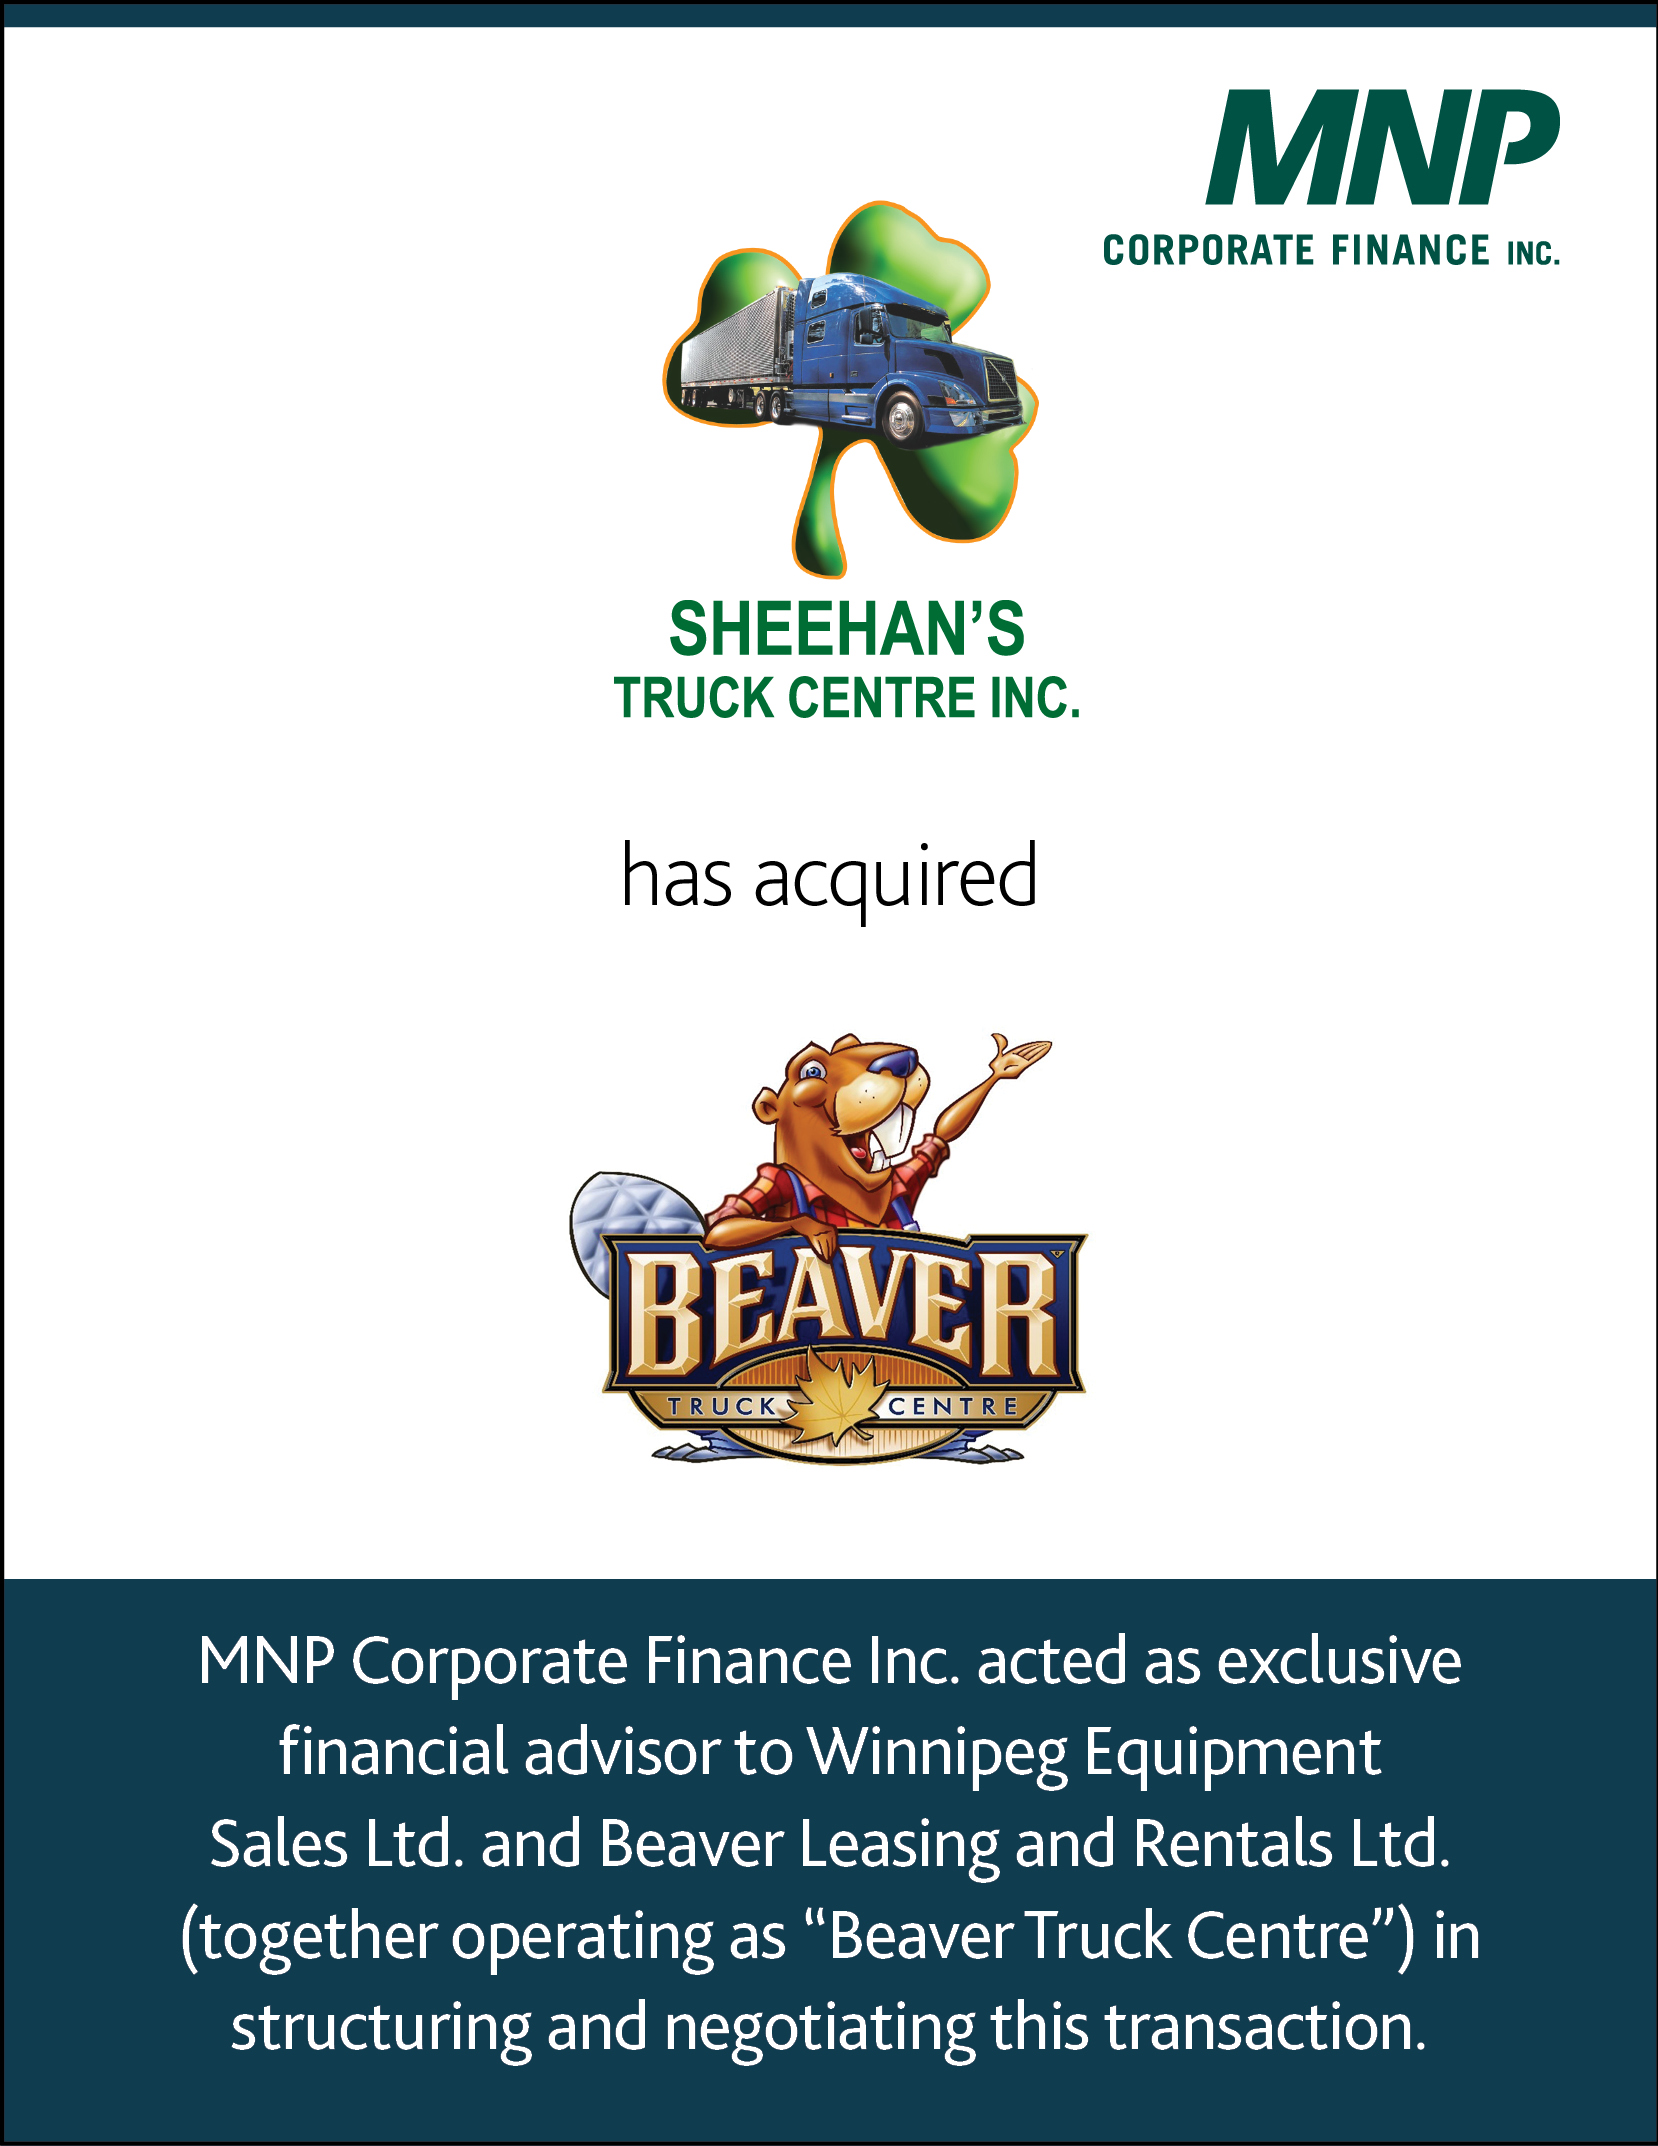 Sheehan's Truck Centre Inc.has acquired Winnipeg Equipment Sales Ltd. and Beaver Leasing and Rentals Ltd.